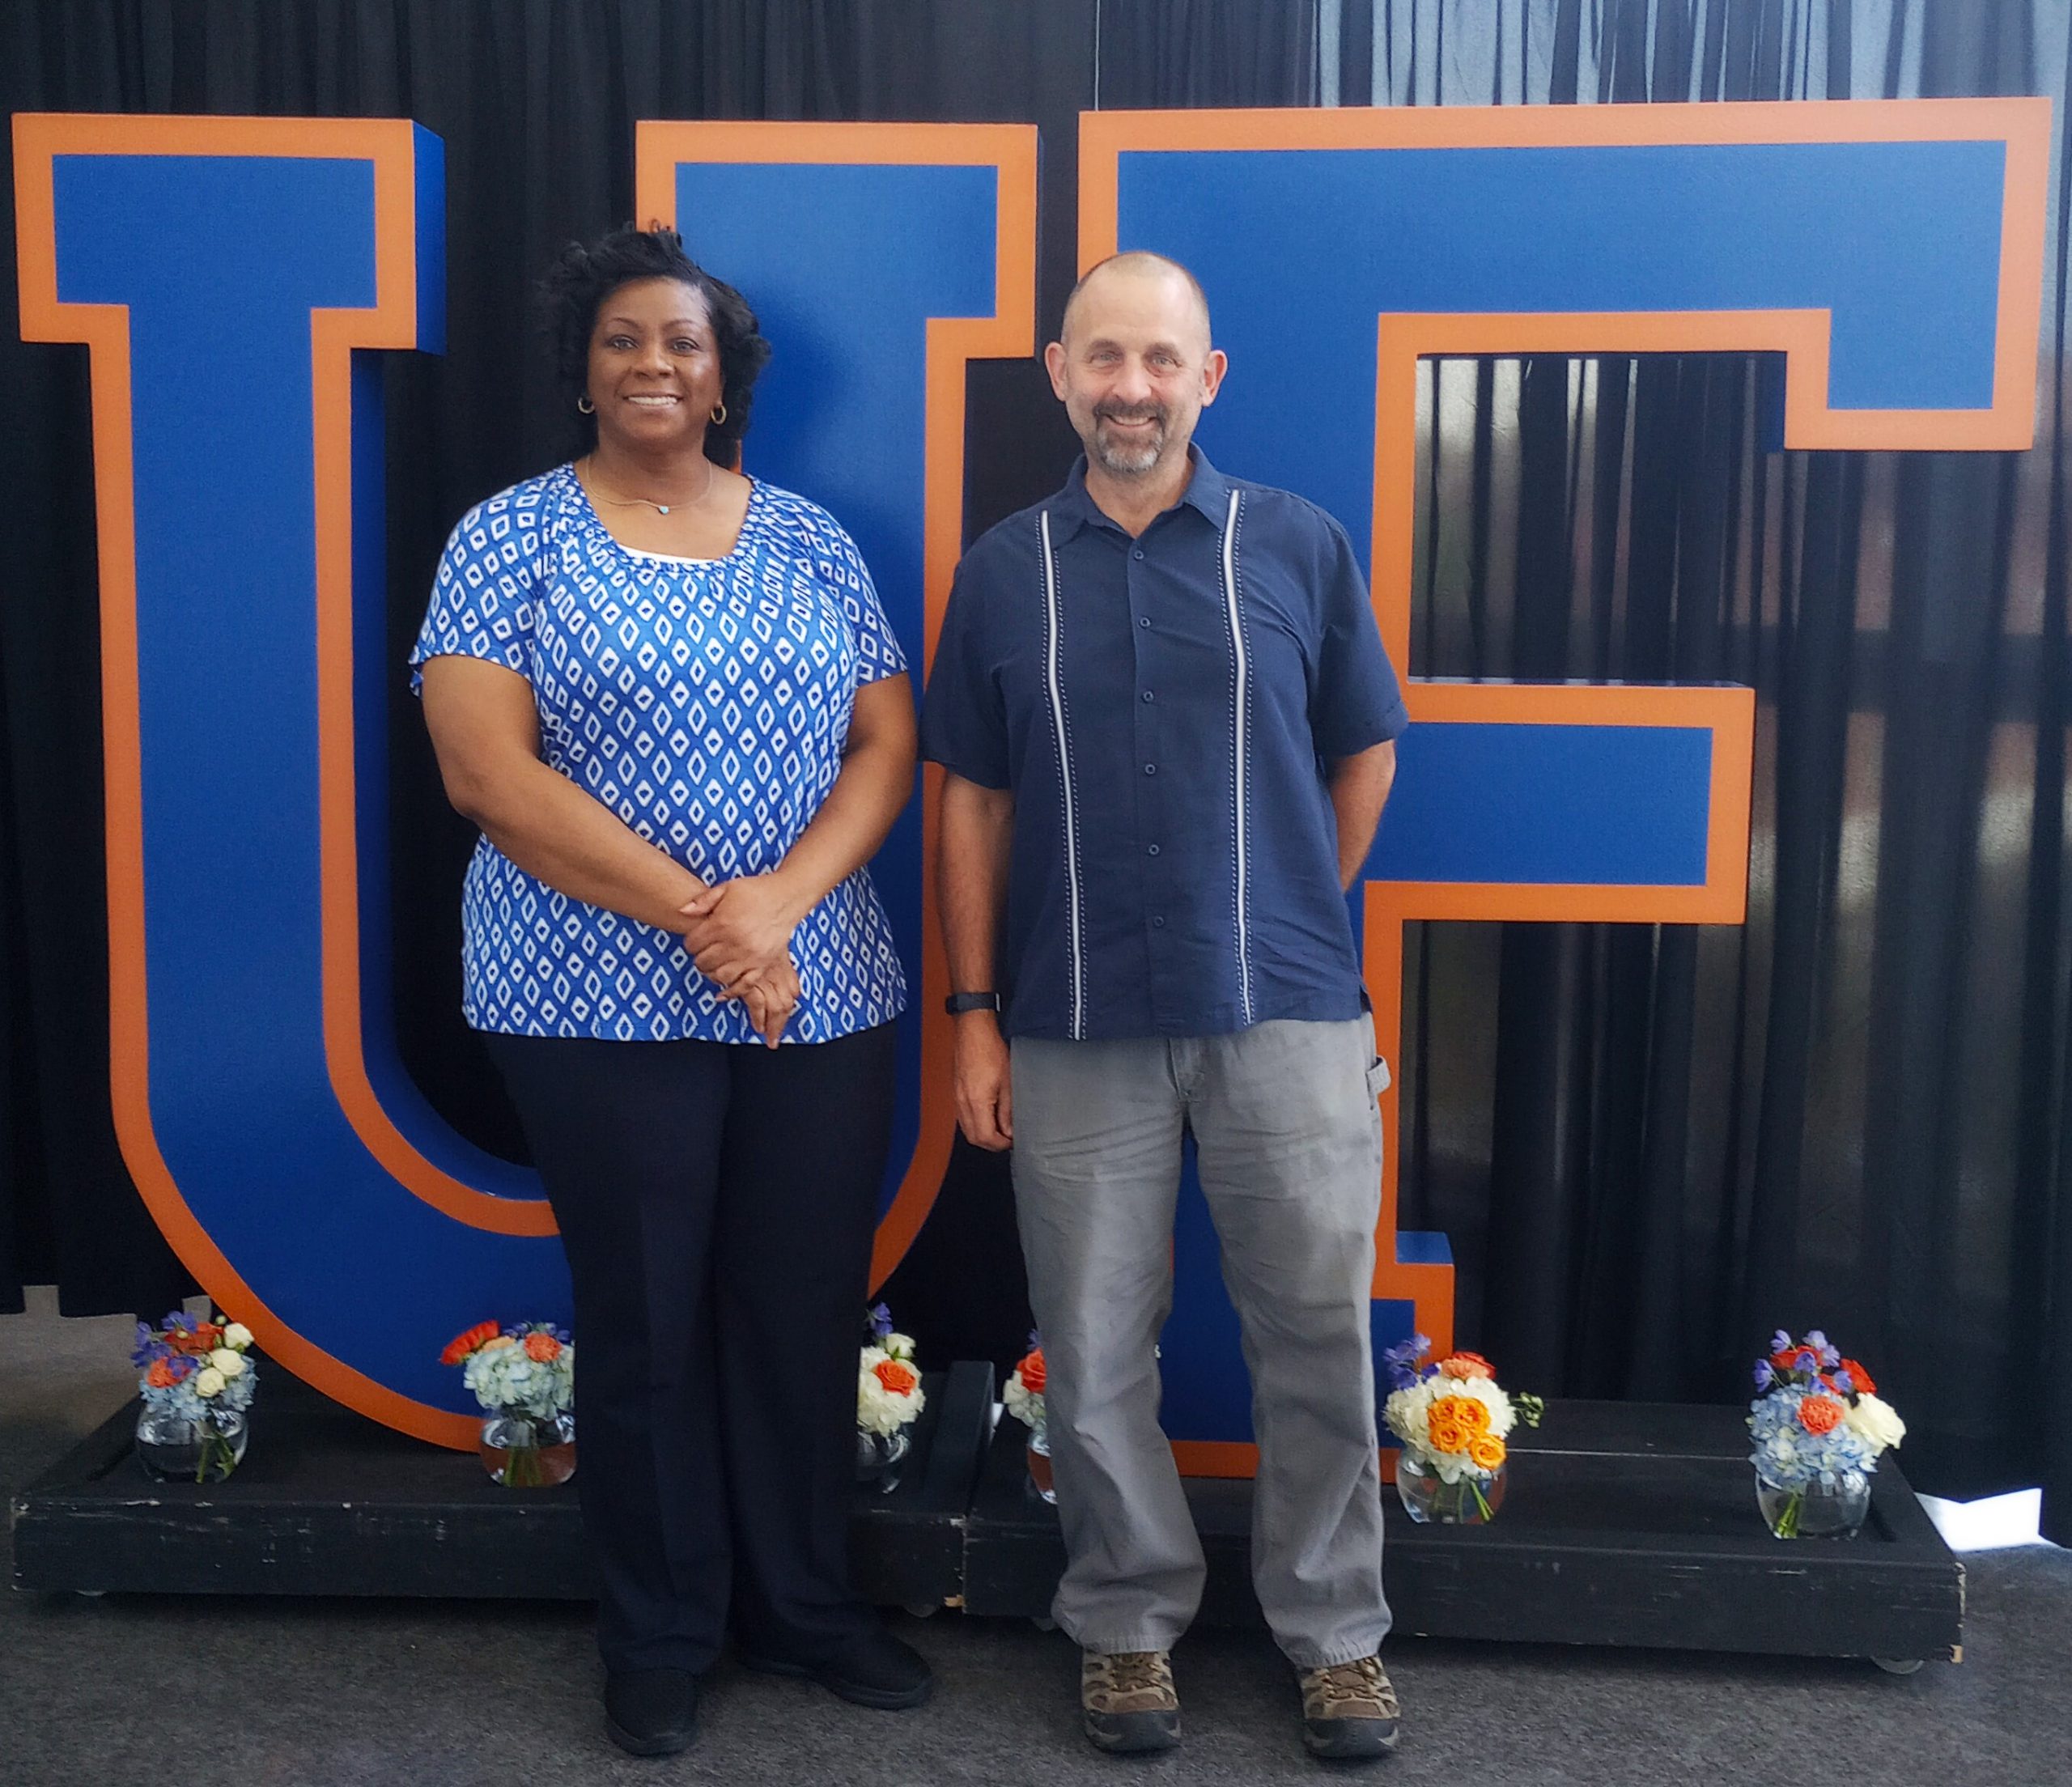 Carrie Williams and Steve Forguson win UF Superior Accomplishment Division Awards